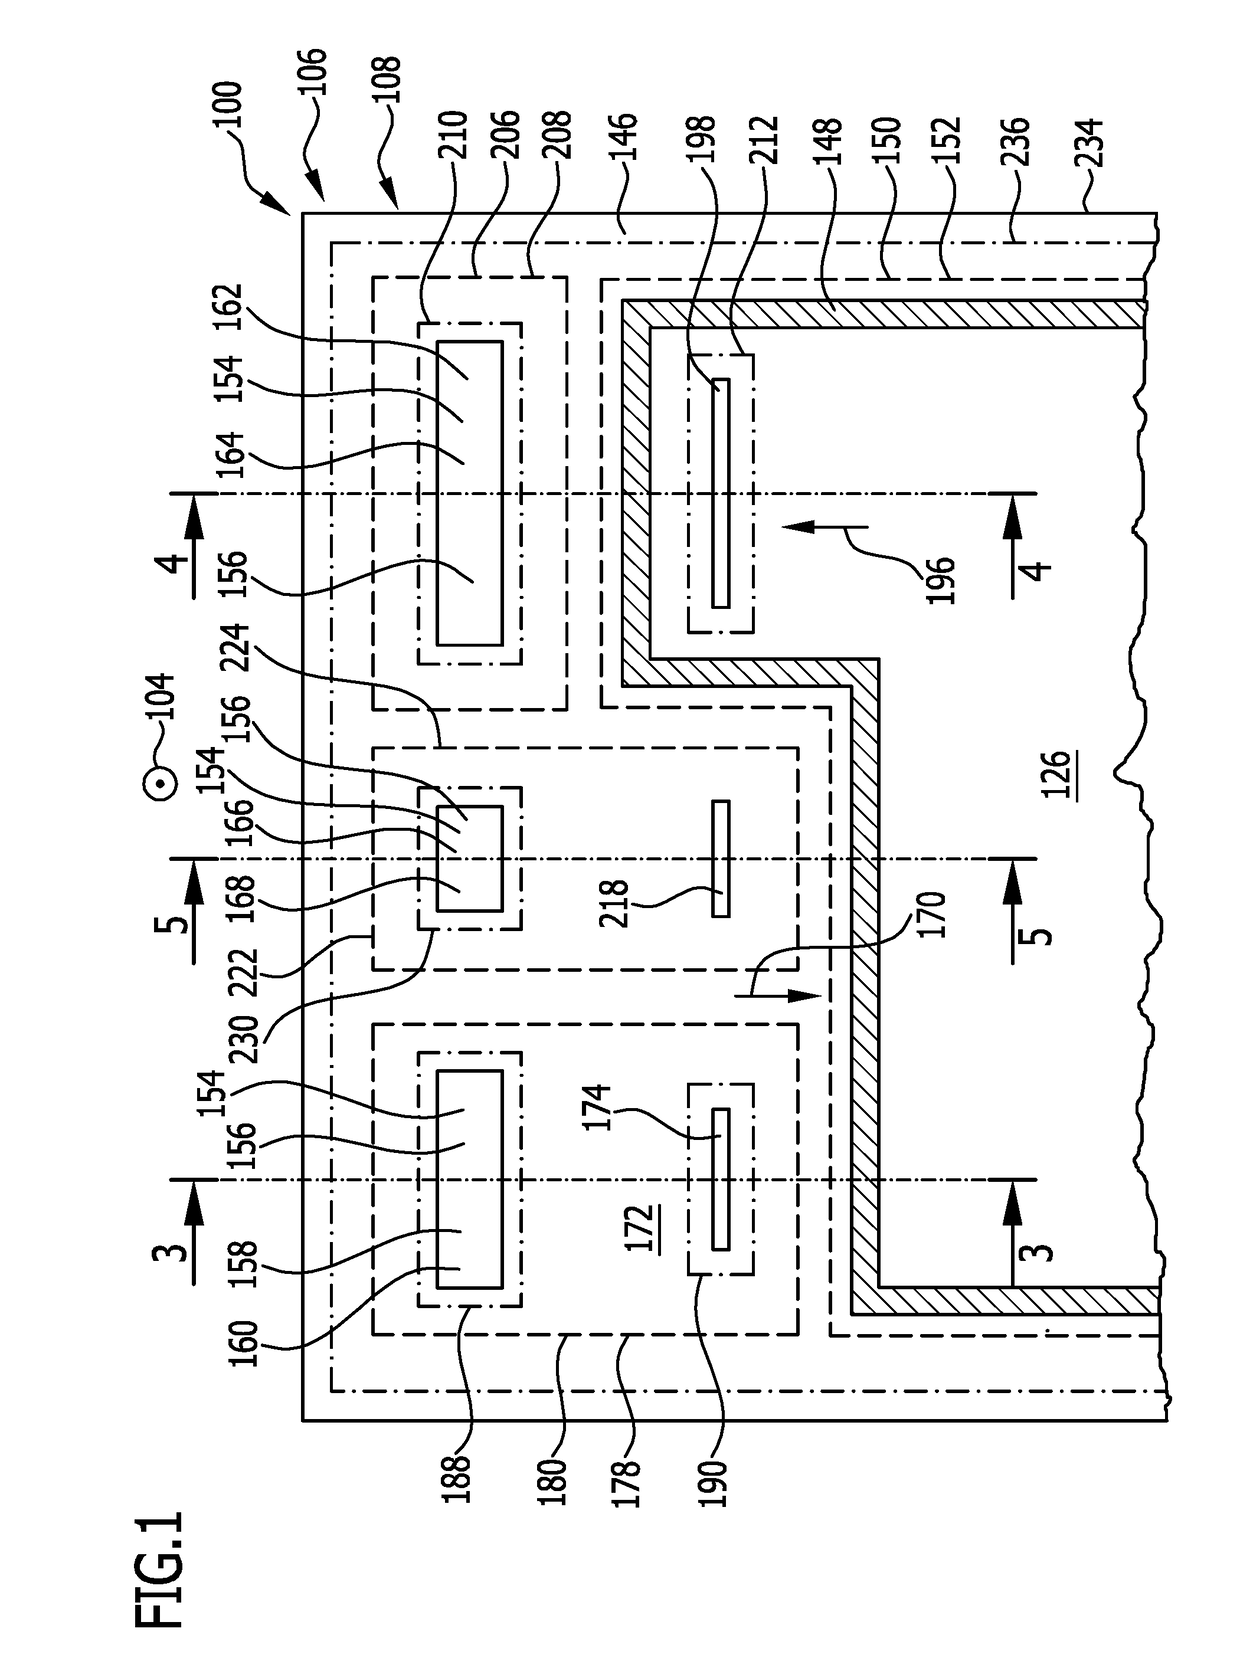 Electrochemical device and method for producing an electrochemical unit for an electrochemical device